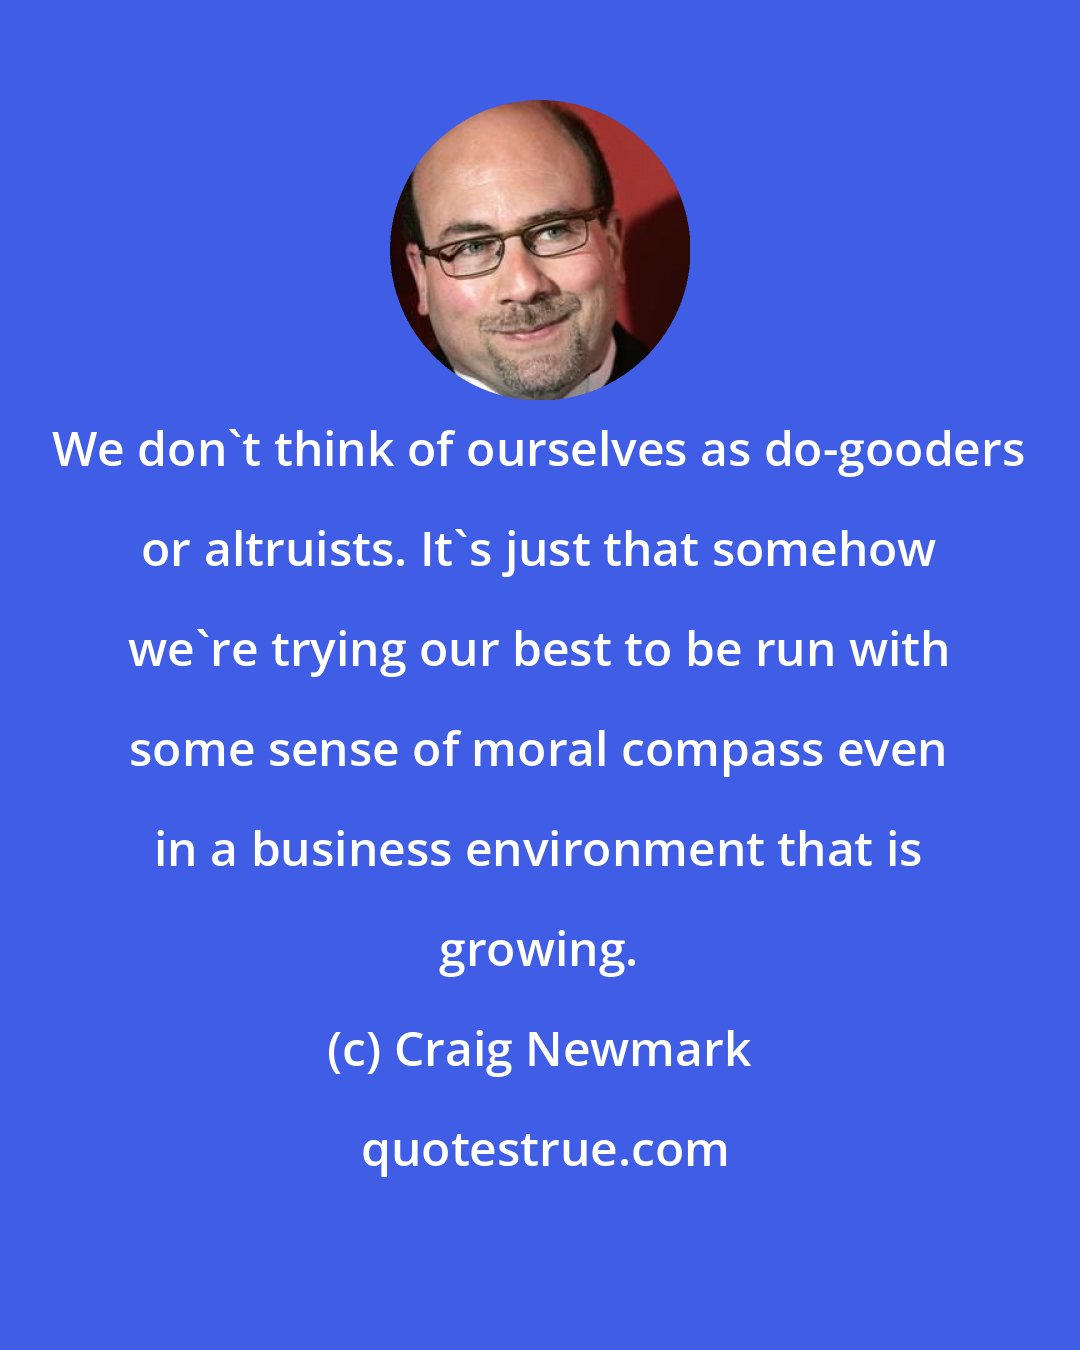 Craig Newmark: We don't think of ourselves as do-gooders or altruists. It's just that somehow we're trying our best to be run with some sense of moral compass even in a business environment that is growing.